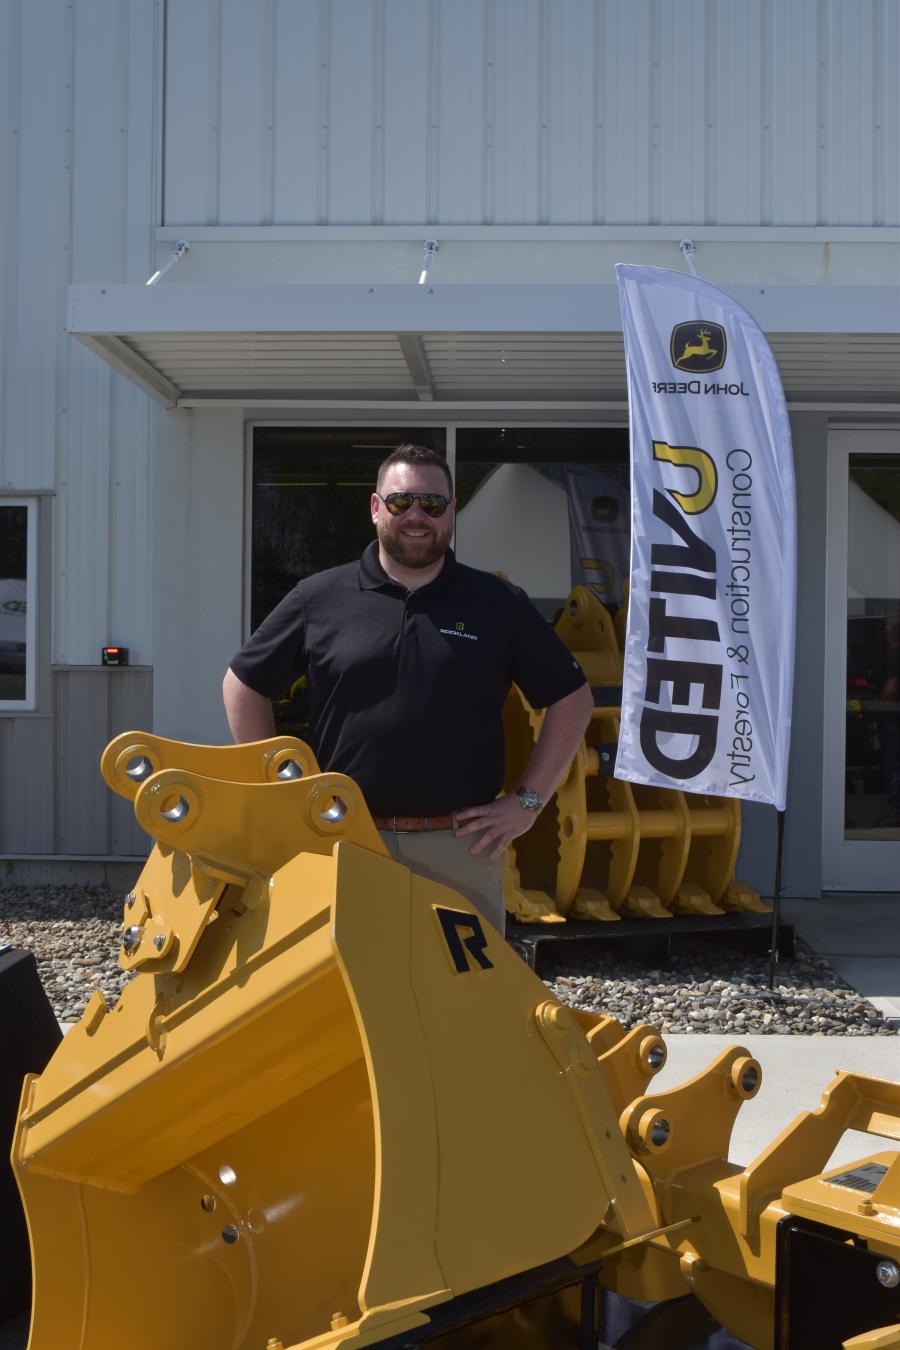 At the grand opening celebration, Mike Galambos of Rockland Manufacturing stands ready to discuss his company’s huge variety of attachments for every application. 
(CEG photo)